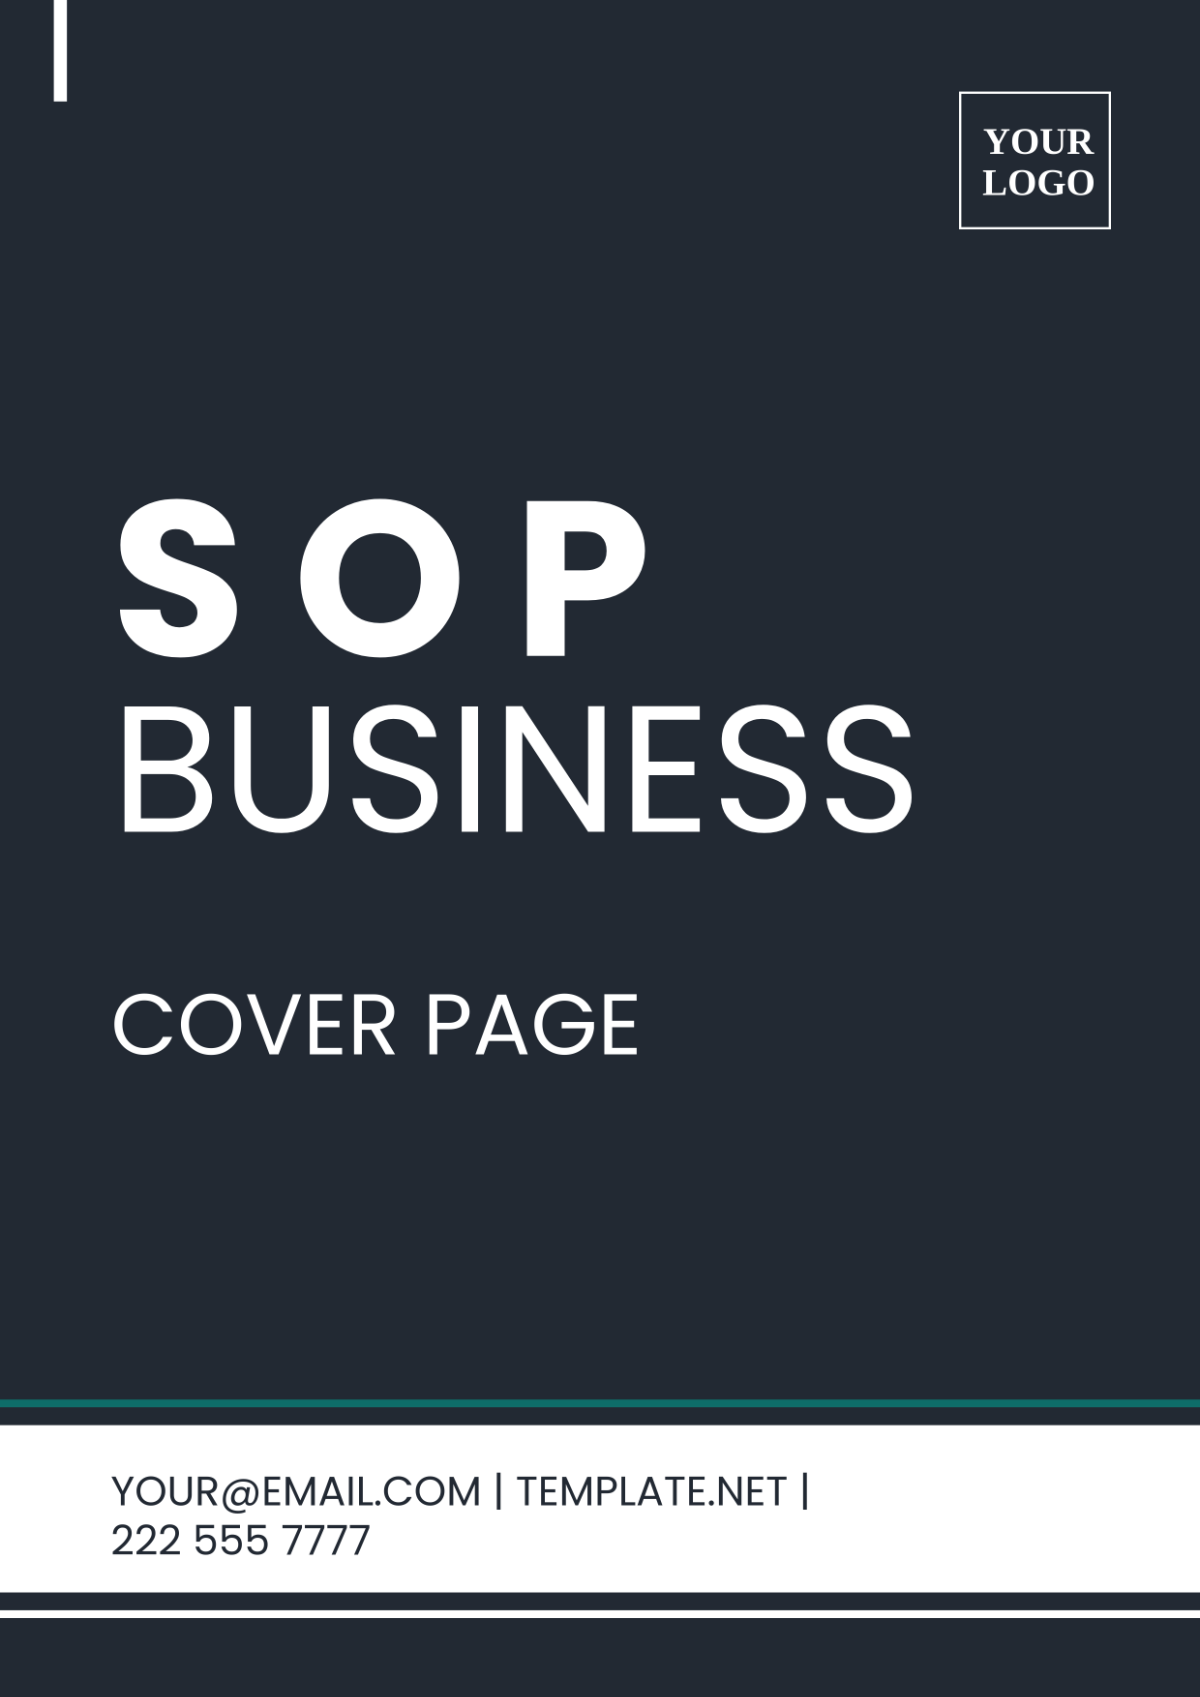 SOP Business Cover Page Template